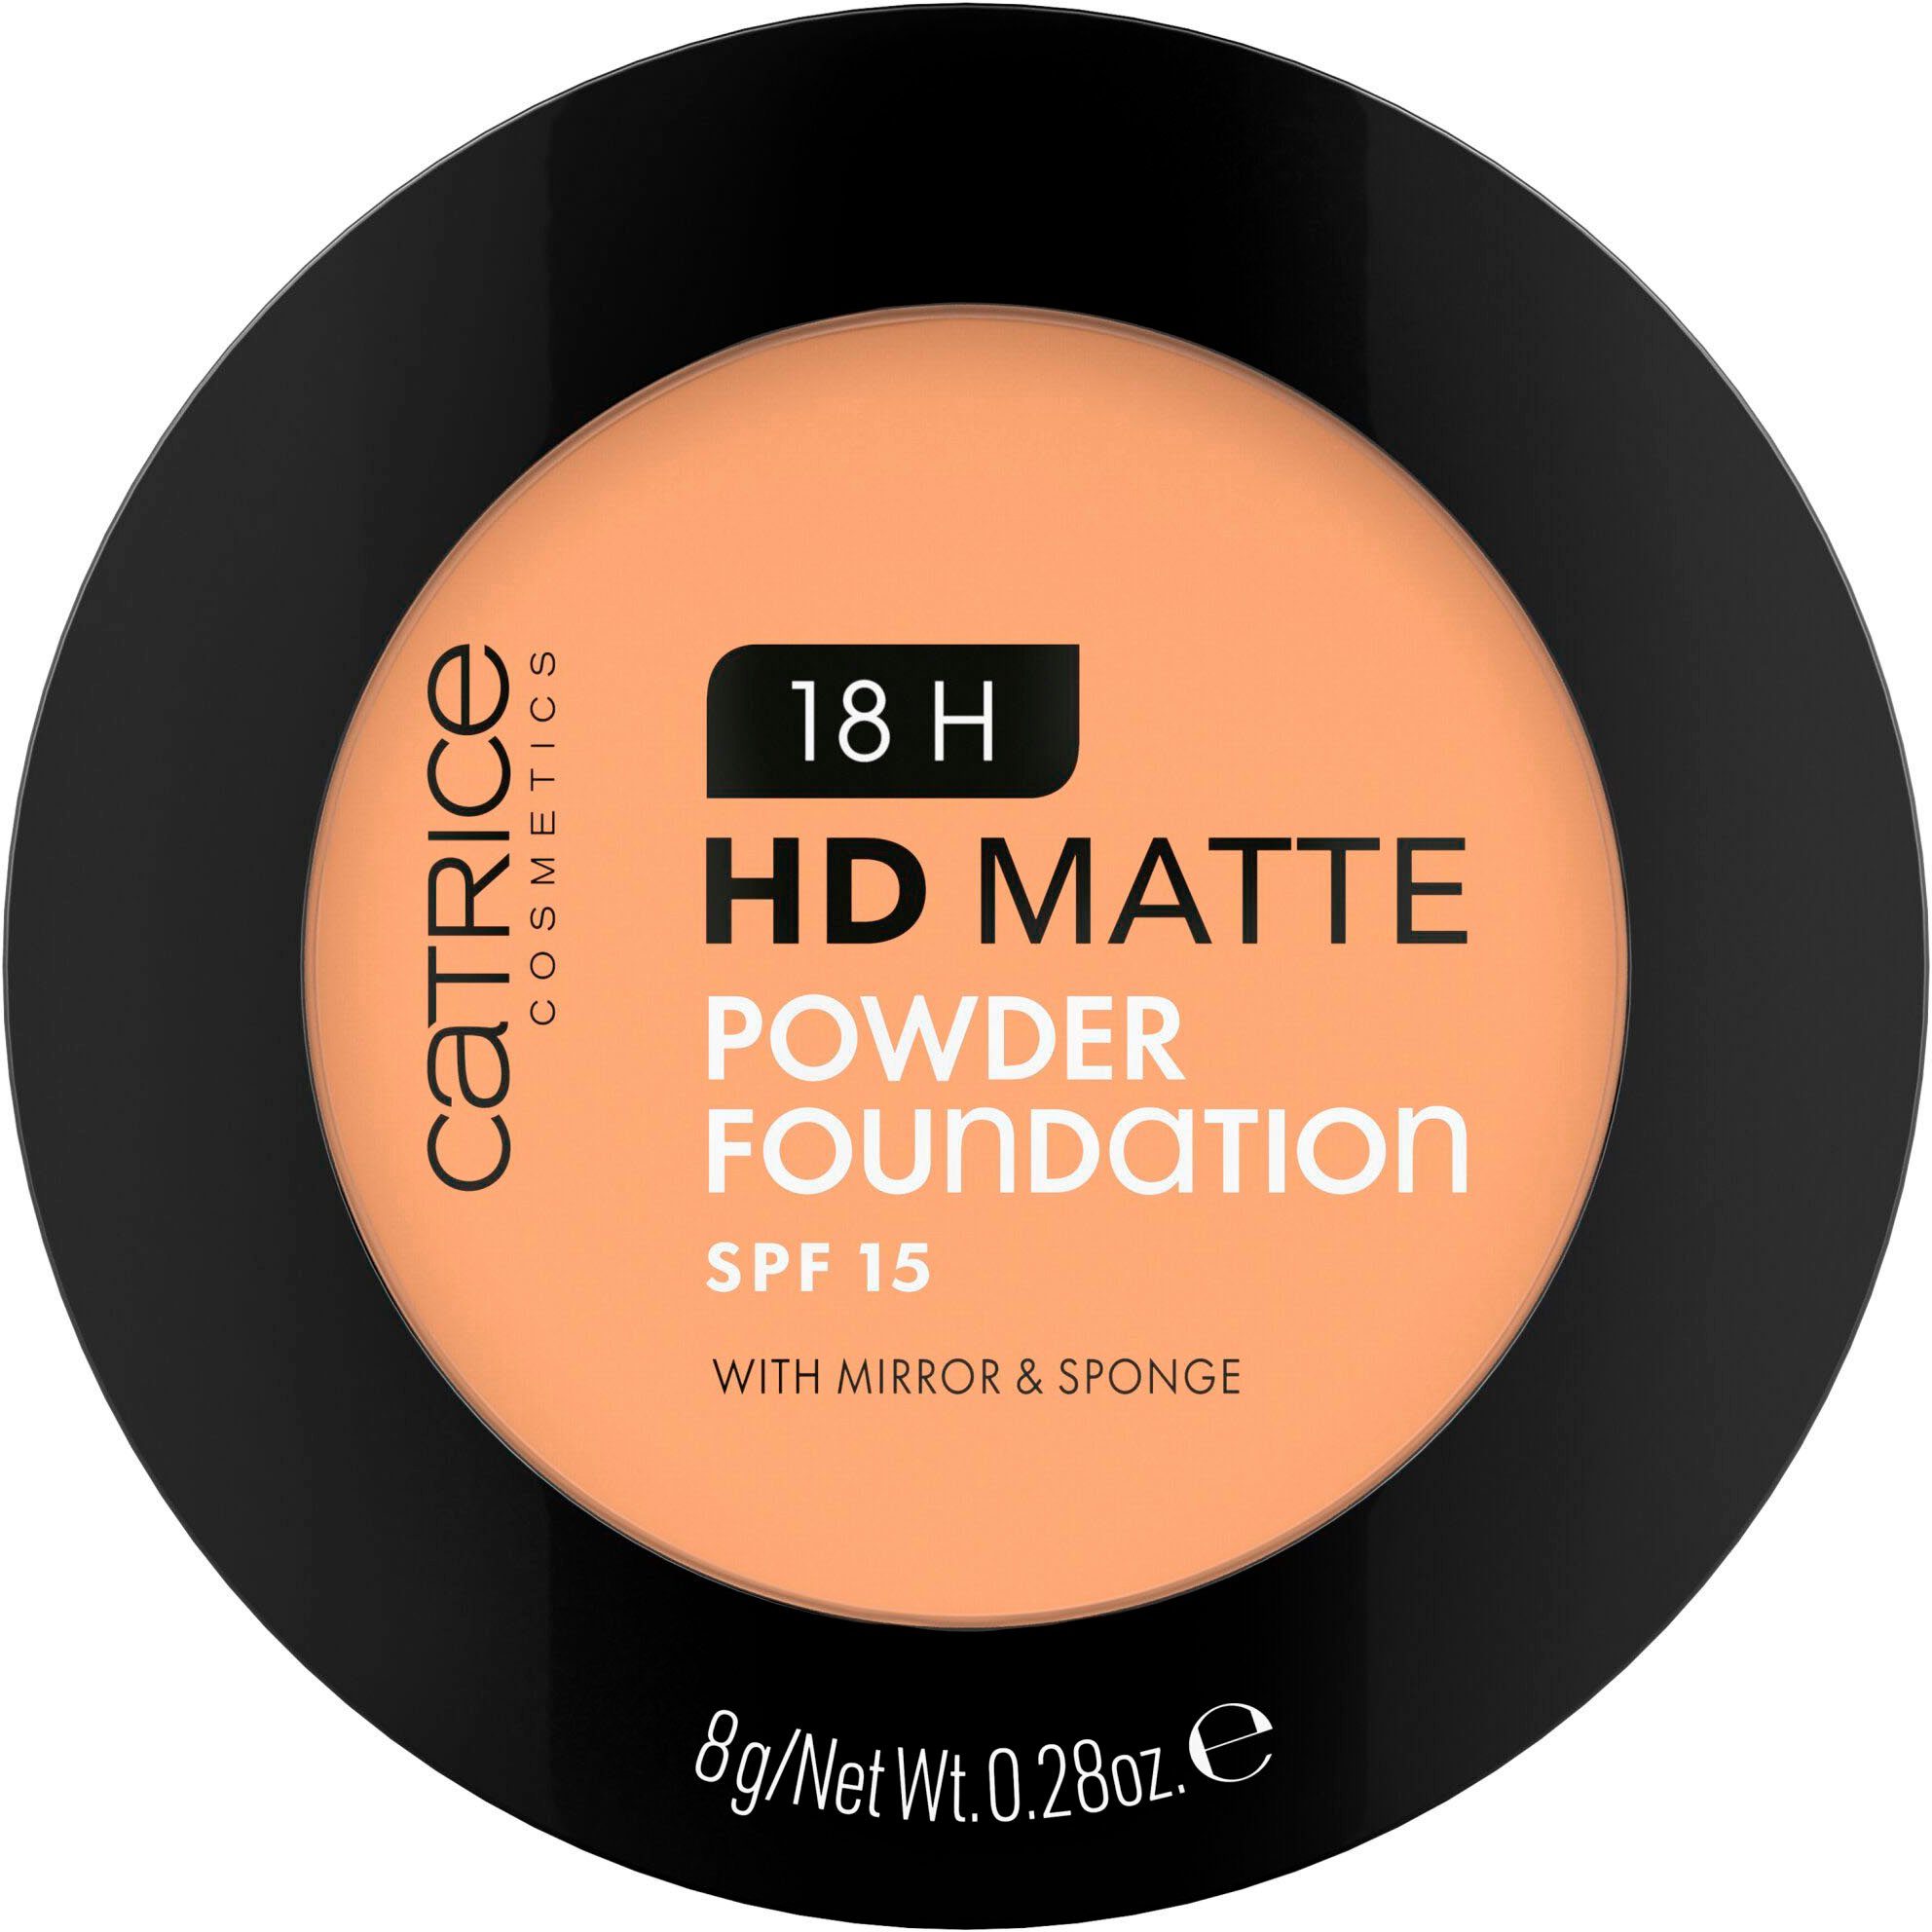 HD Puder 18H 045N 3-tlg. Catrice nude Powder Foundation, Matte